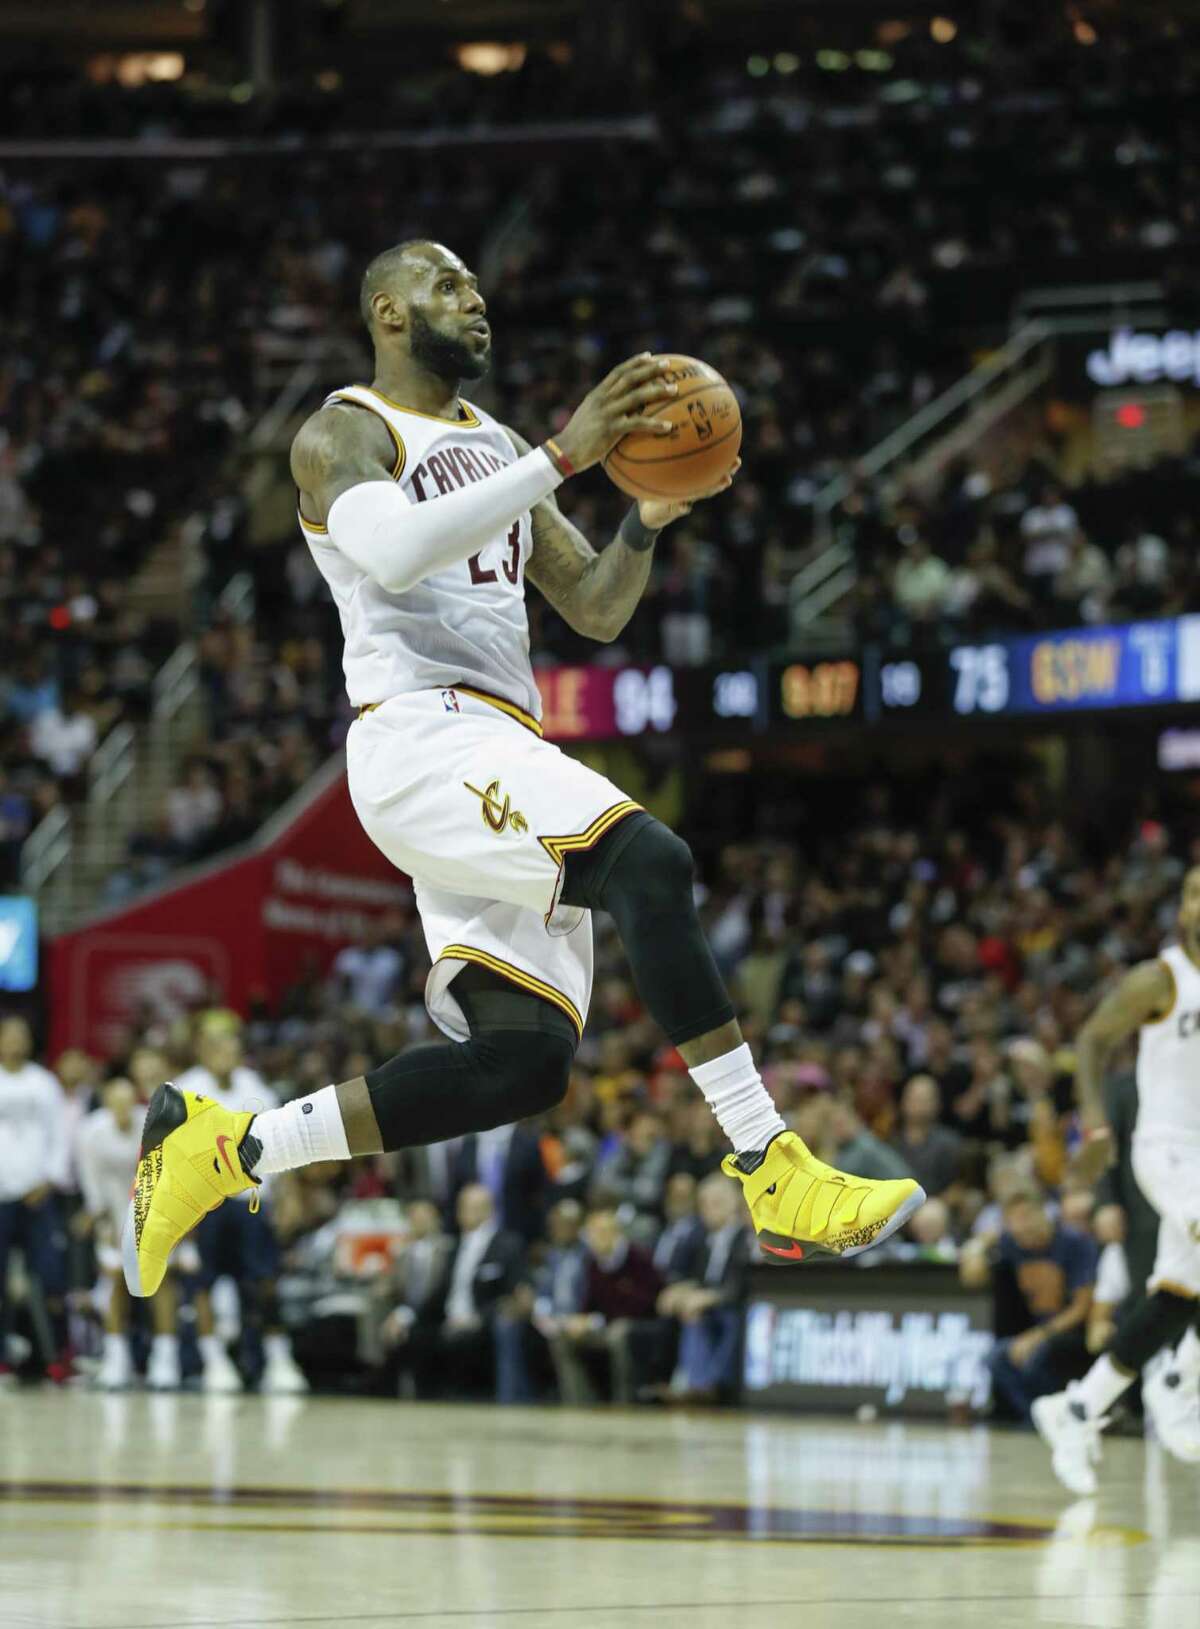 LeBron James knows how to get his team to the NBA Finals